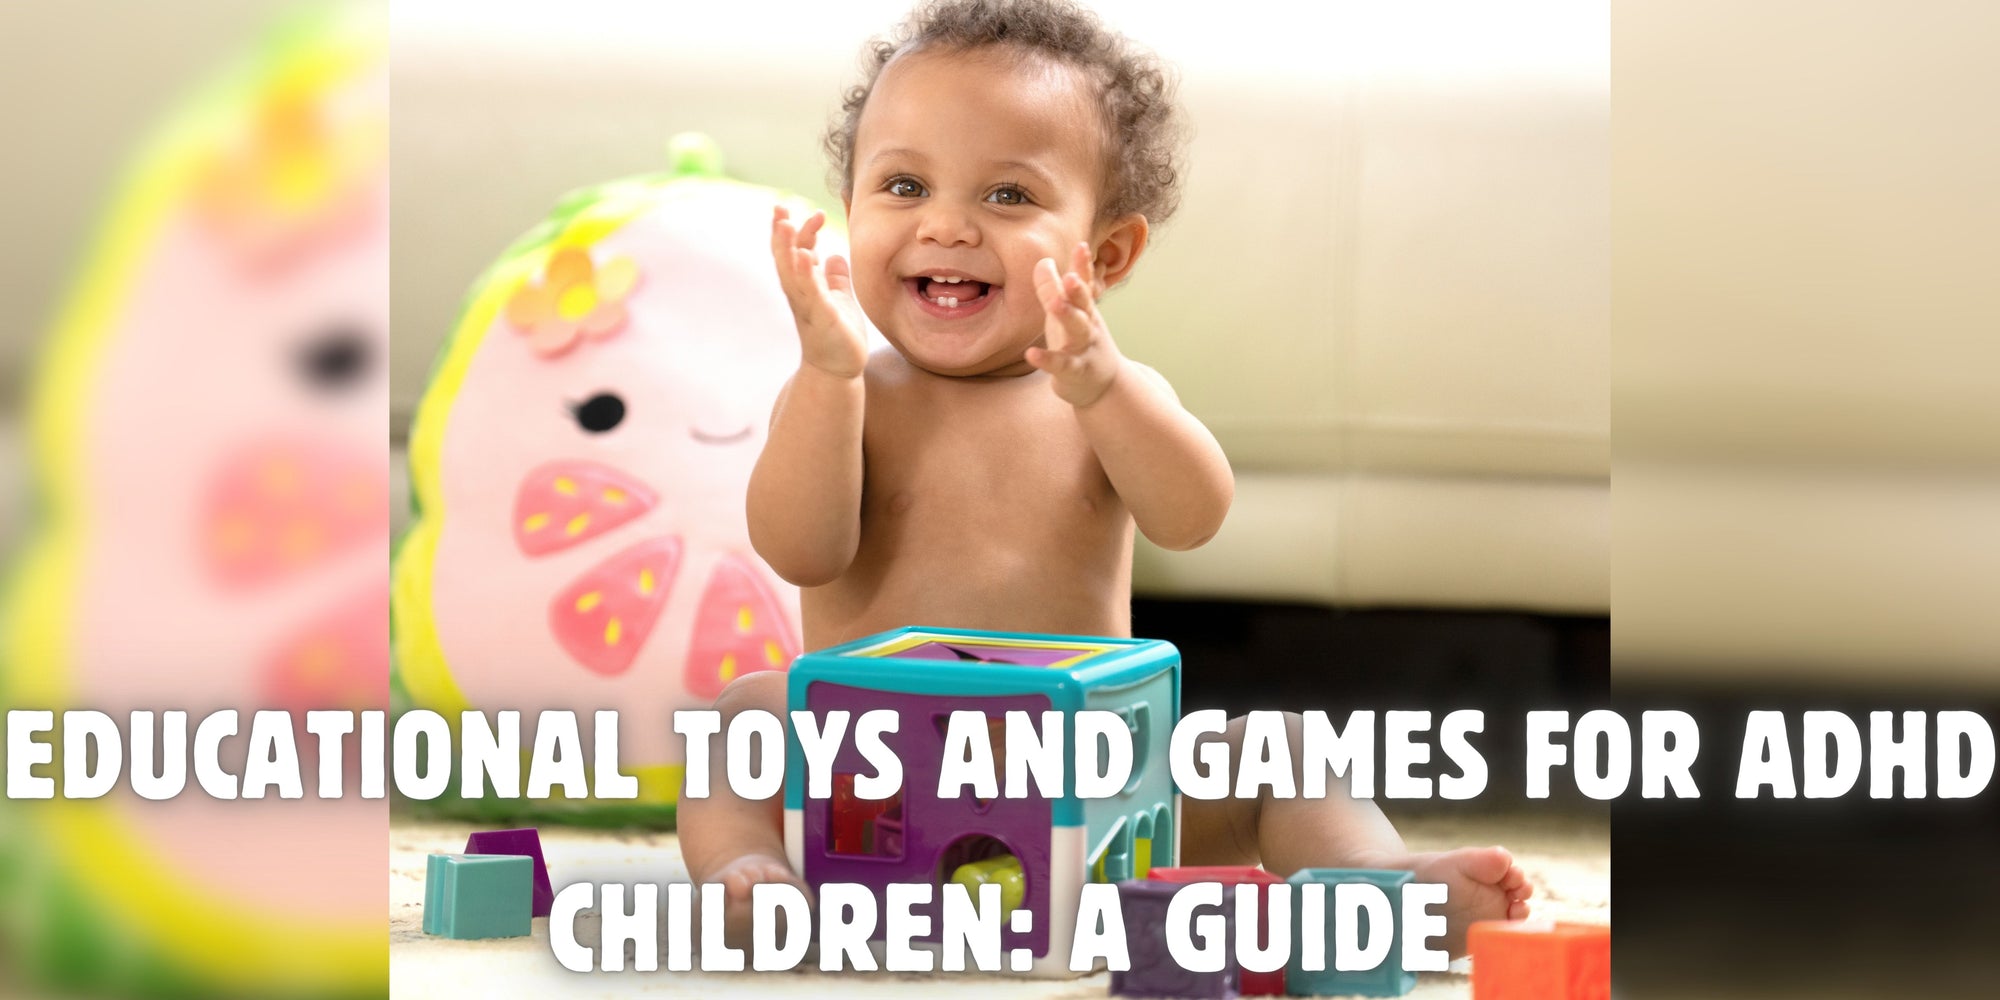 Educational Toys and Games for ADHD Children: A Guide